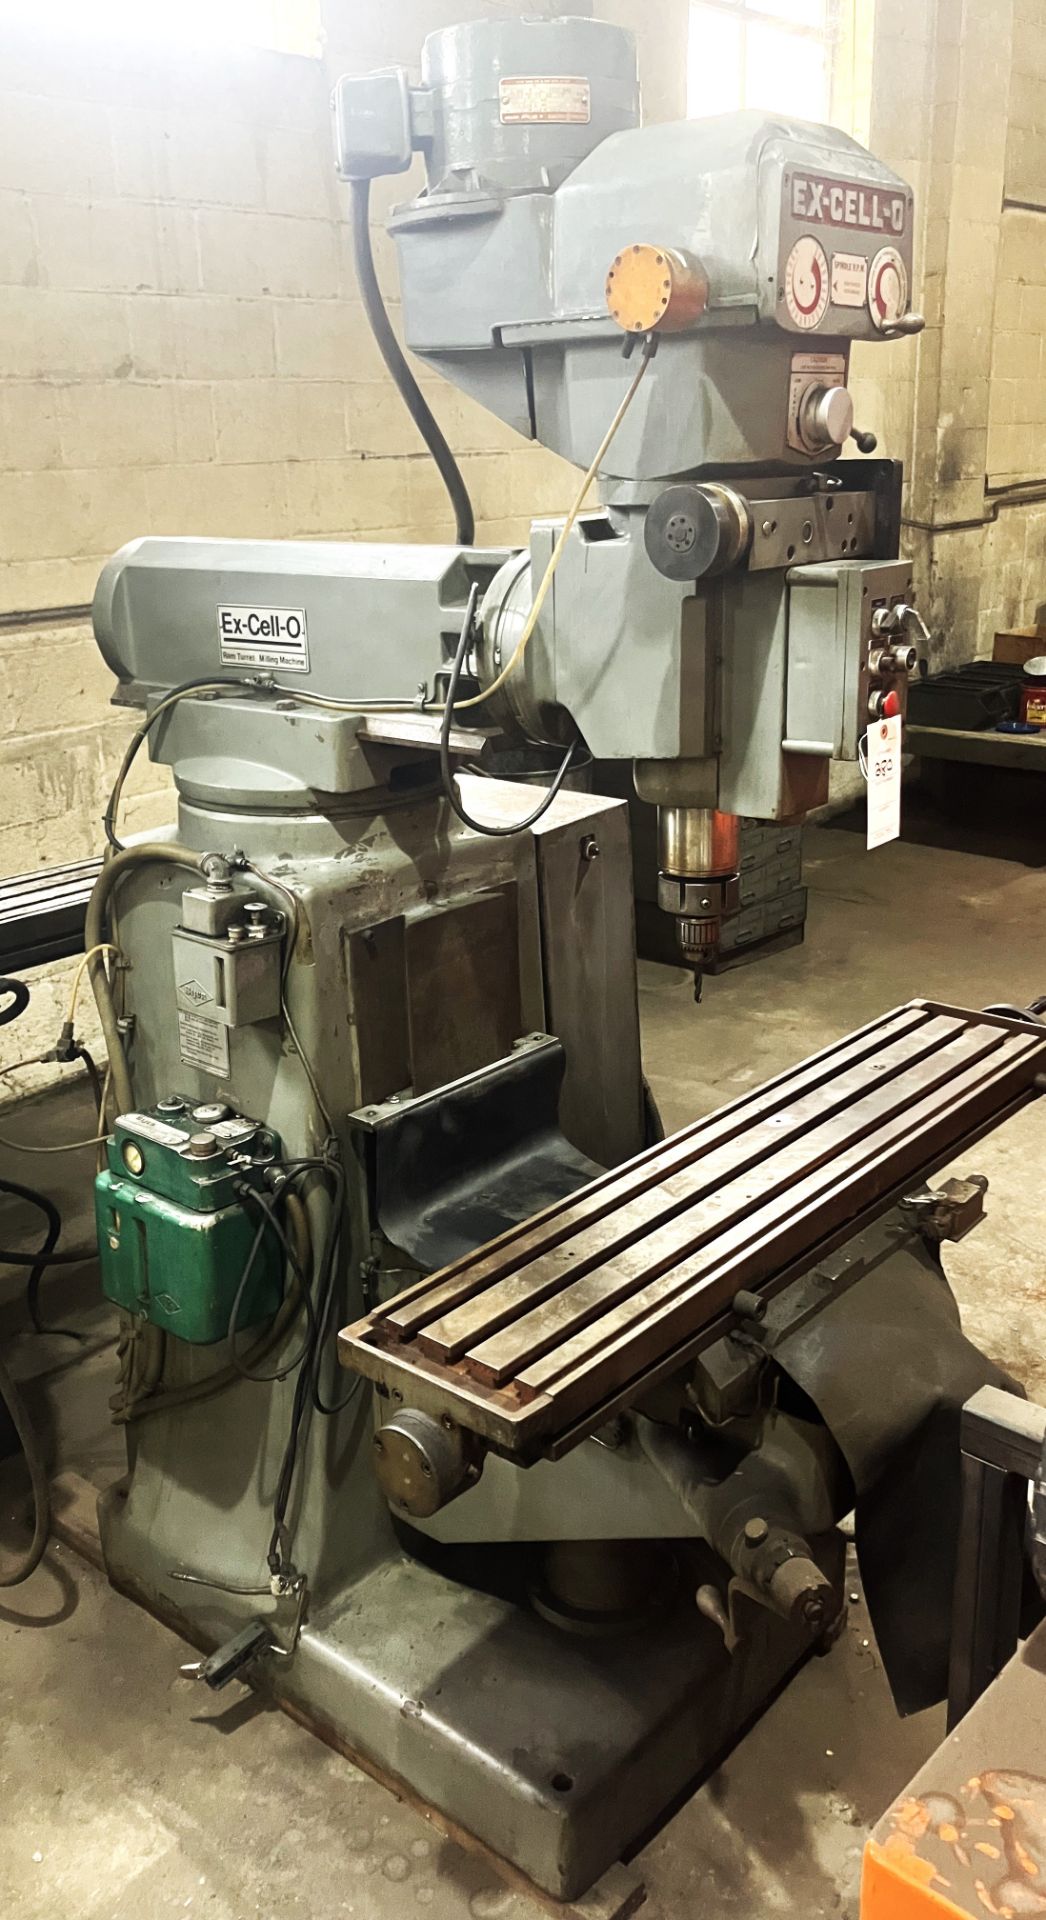 Ex-Cell-O Mod.602 1.5HP Milling Machine - S/N 6028590, Spindle Speeds 100-3800 RPM, R8 Spindle, 9" x